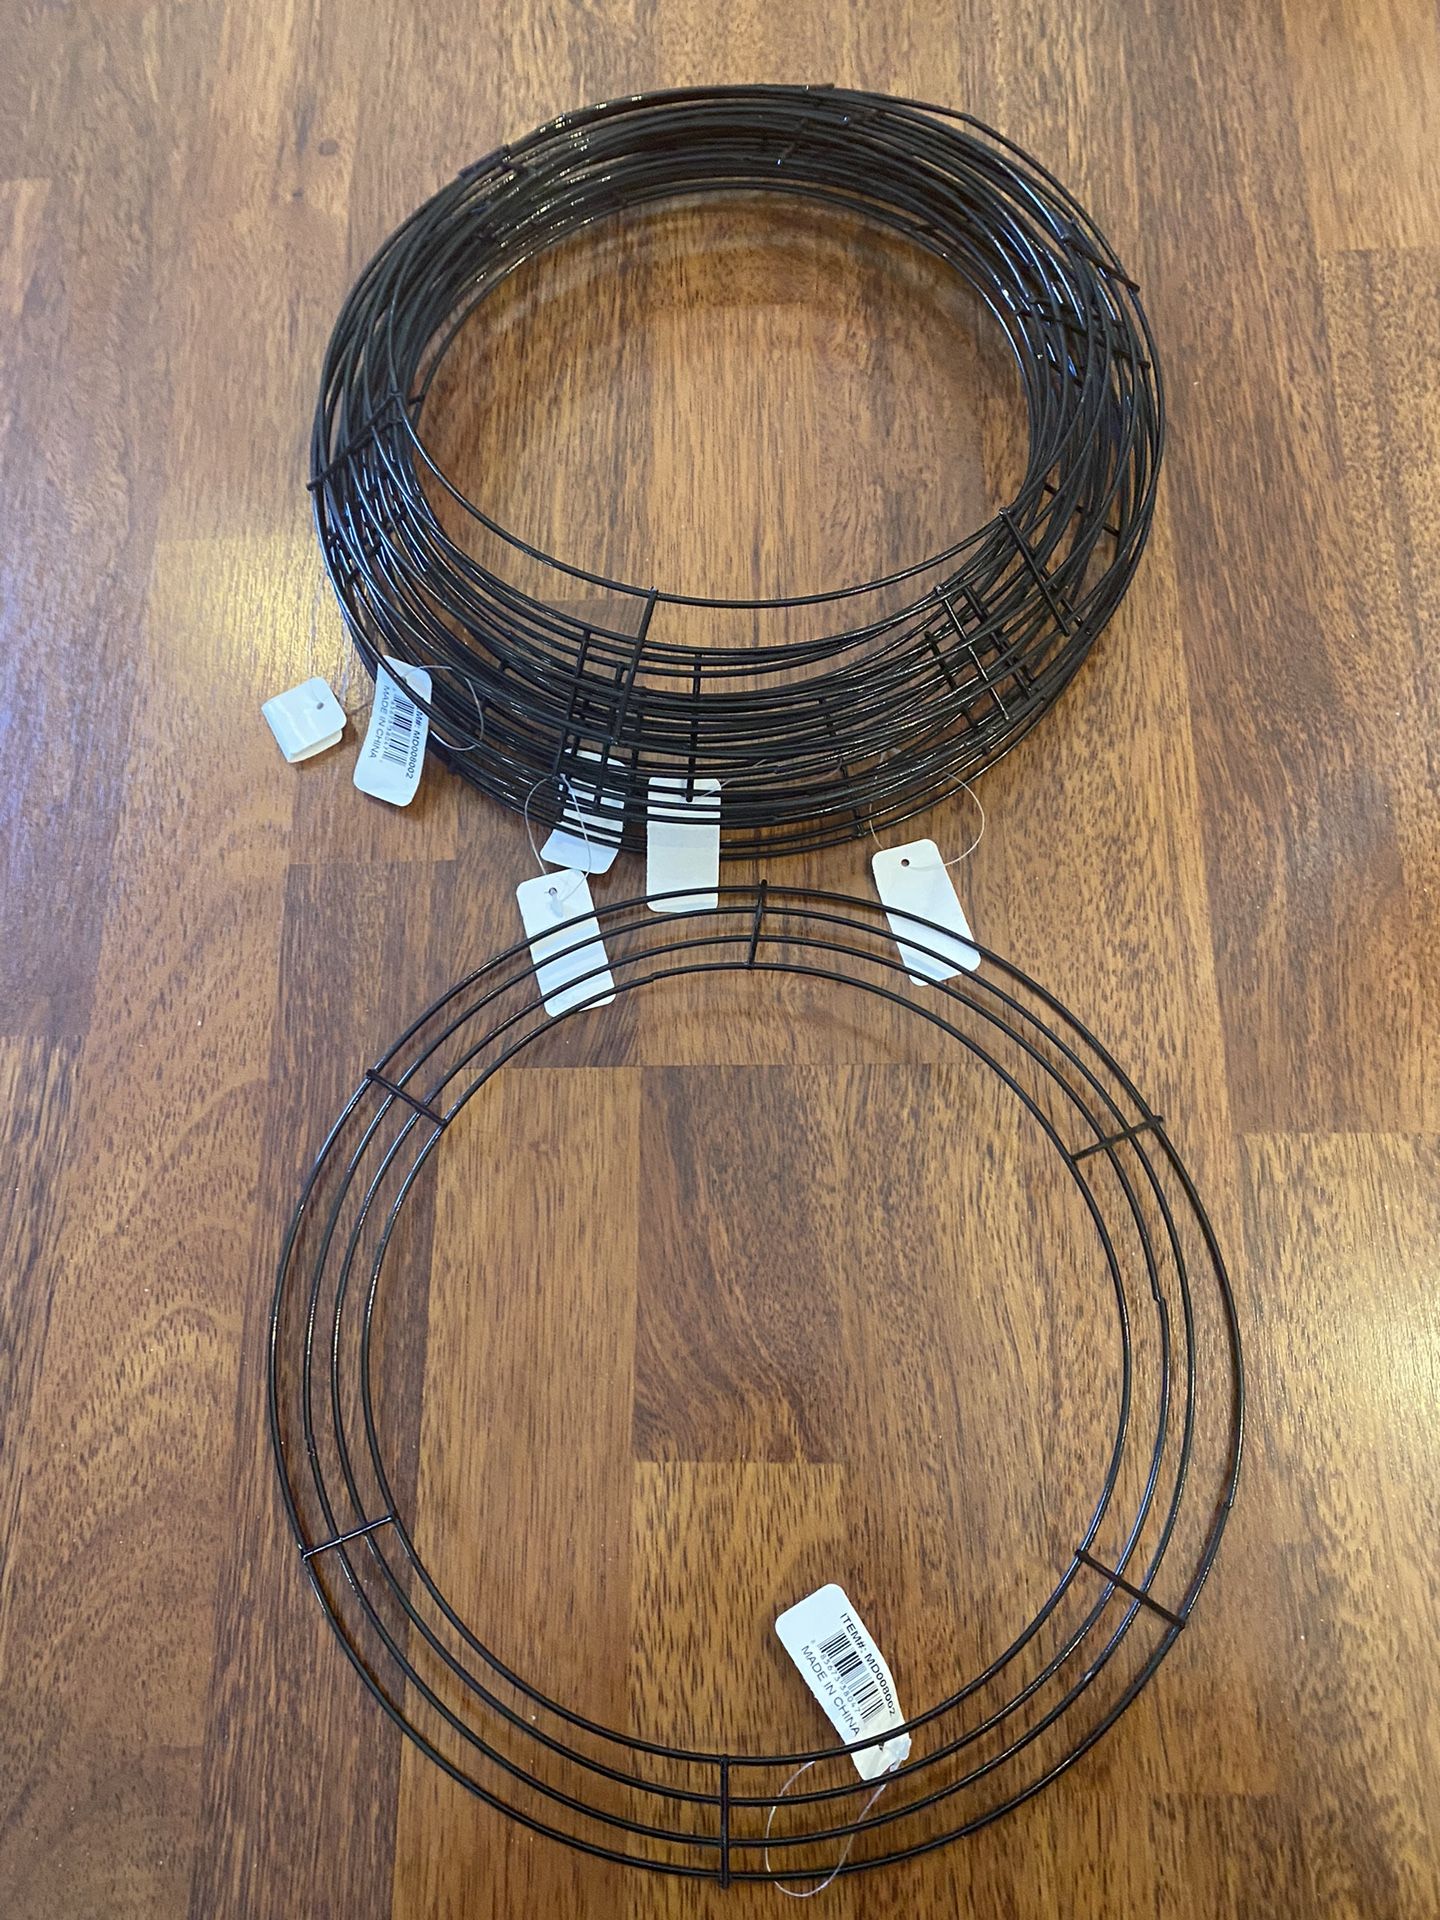 Set Of EIGHT (8) New 12-inch Wire Wreath Form - 4 Wire Black